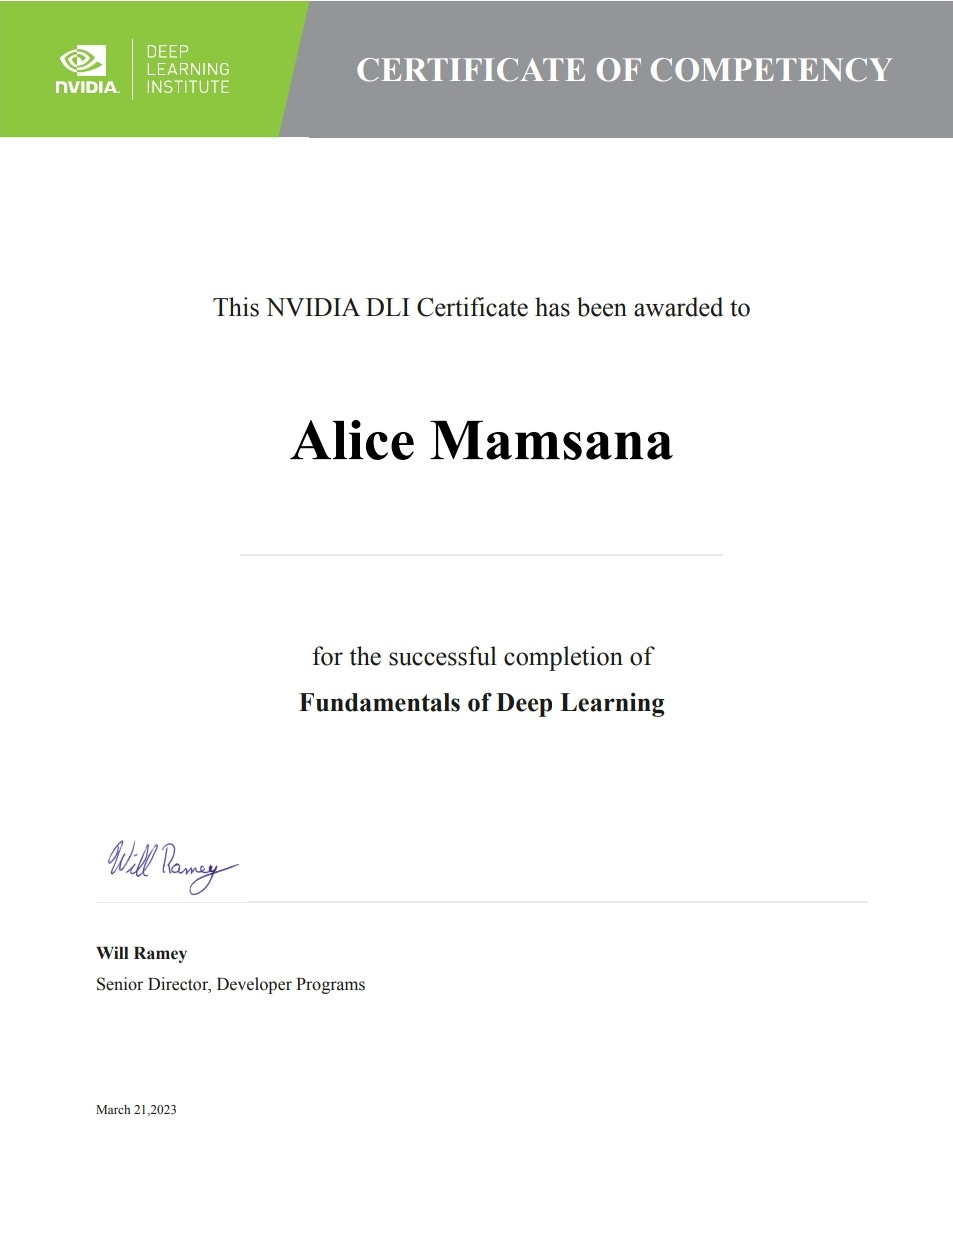 Certificate of competency awarded to Alice by NVIDIA for her completion in the Fundamentals of Deep Learning by Will Ramey, Senior Director, Developer Programs on March 21st, 2023. 